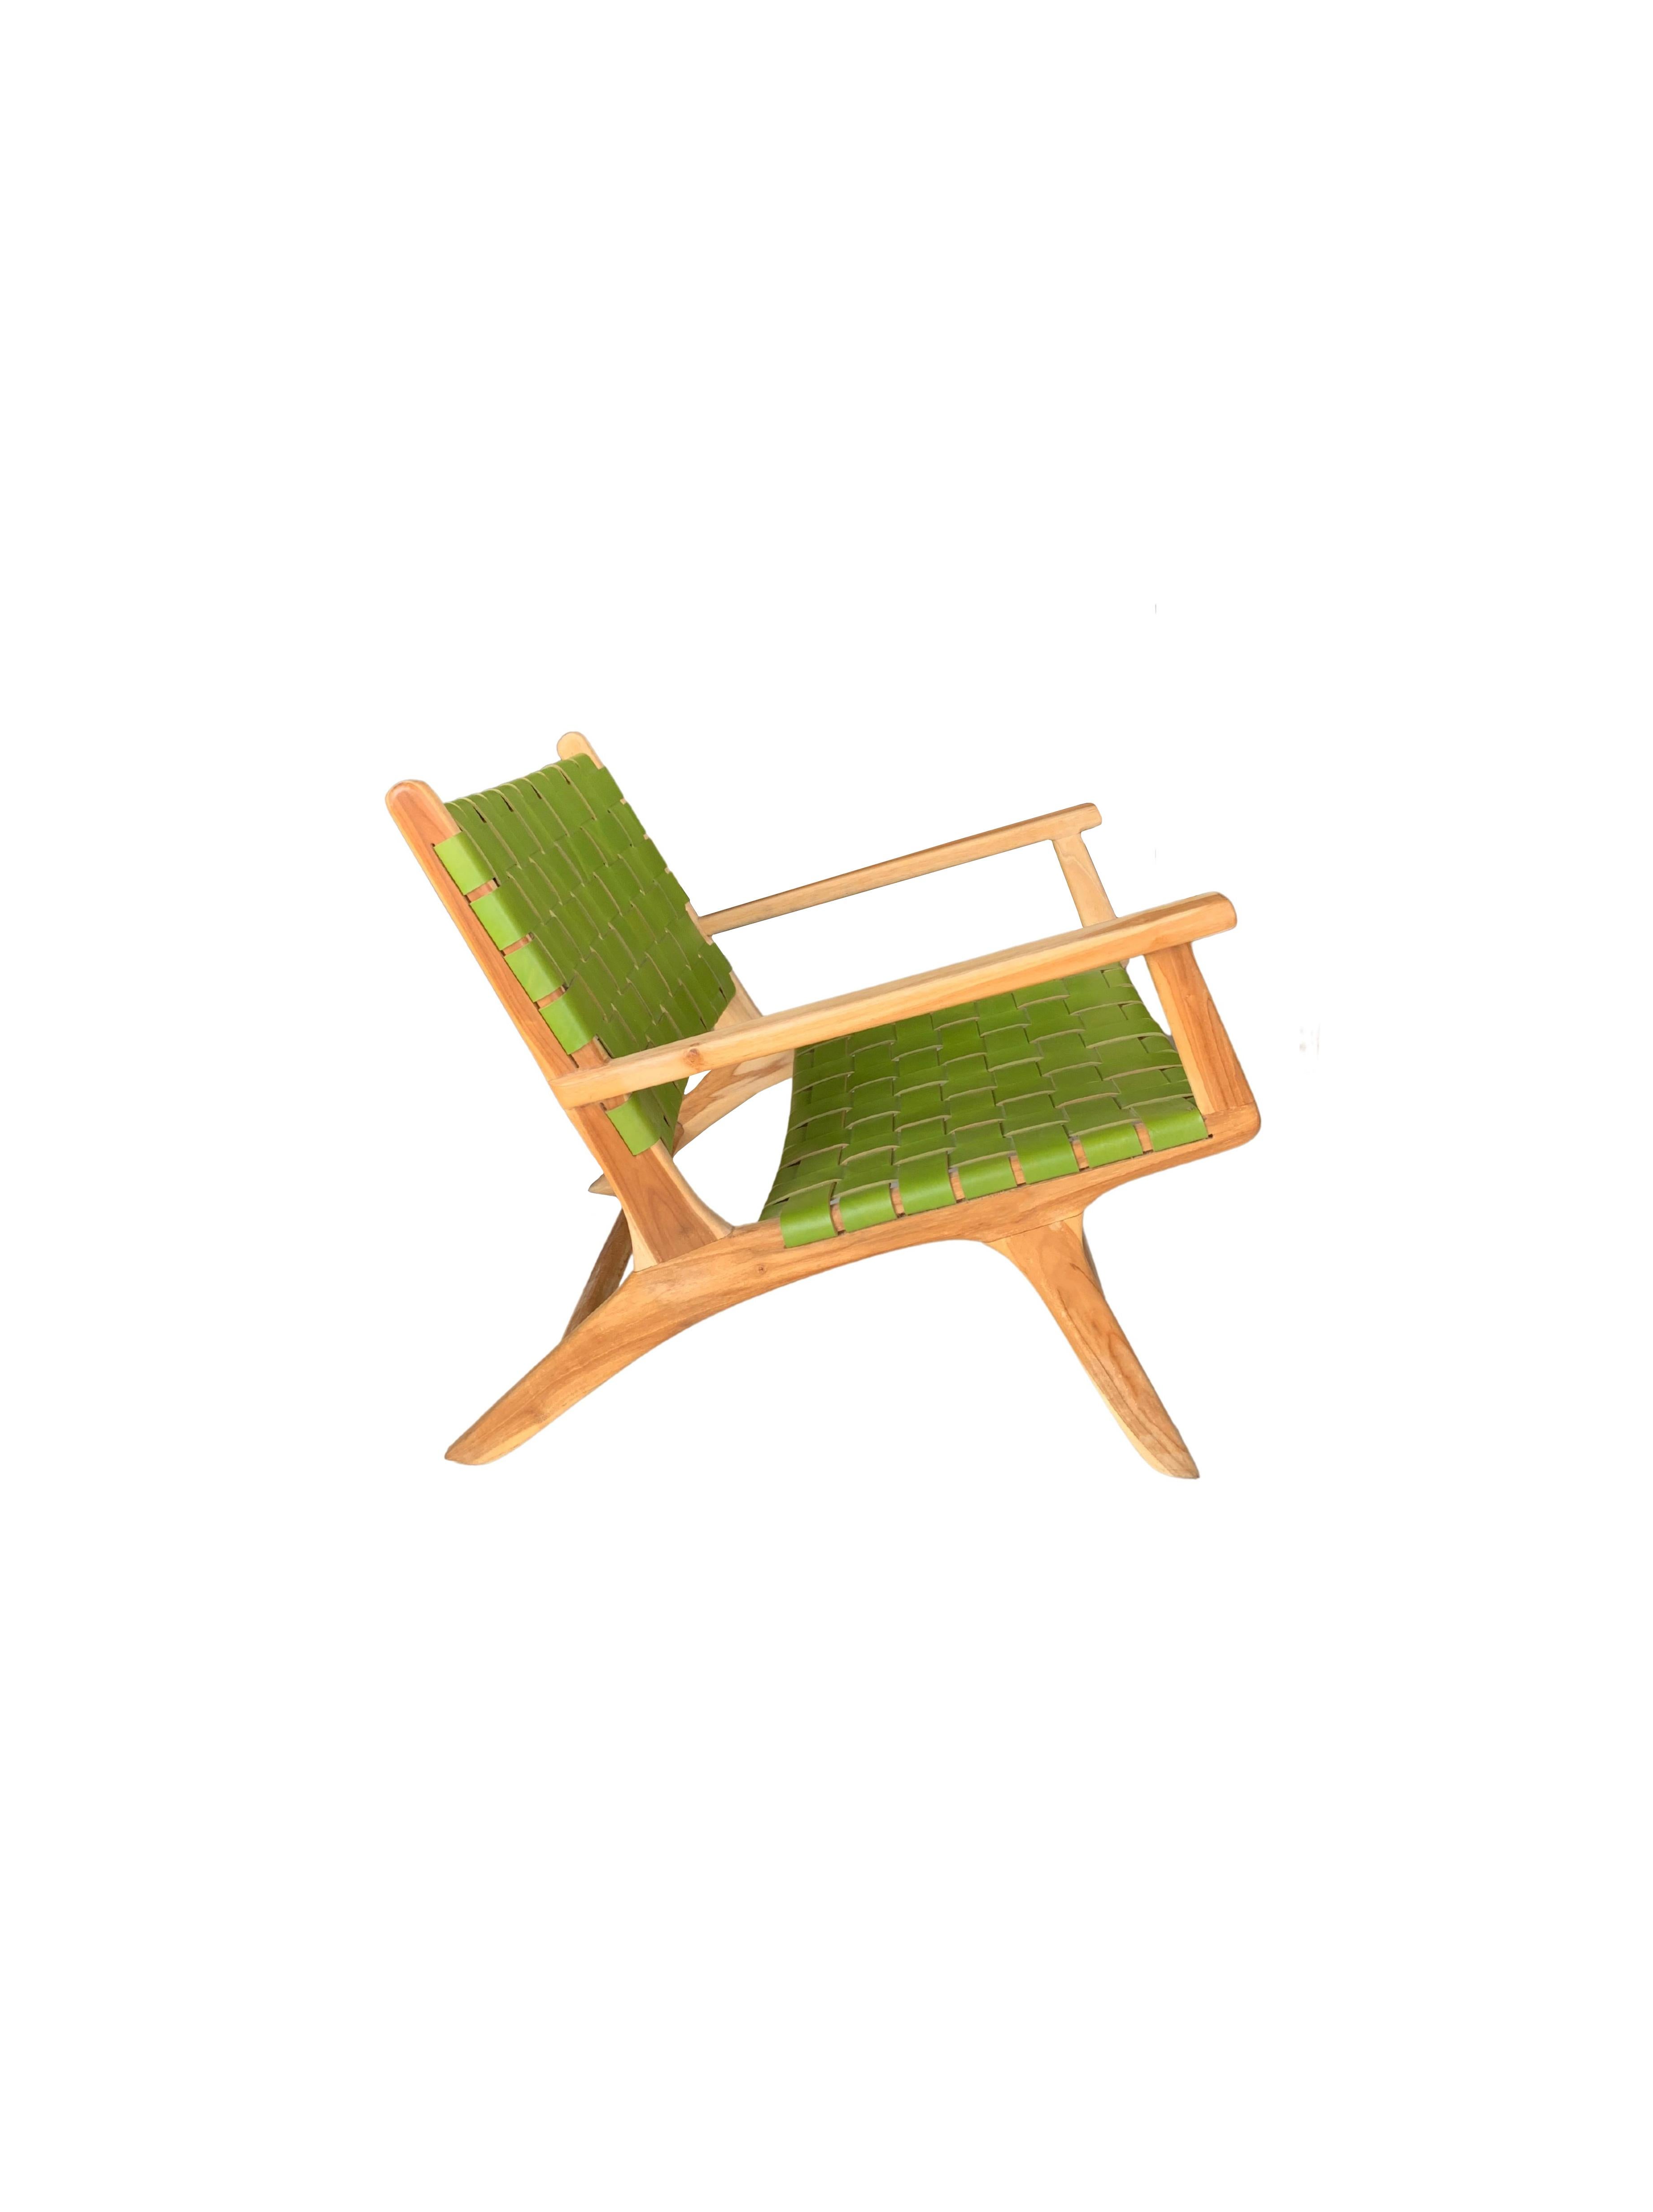 Modern Teak Wood Framed Lounge Chair, with Green Woven Leather Seat